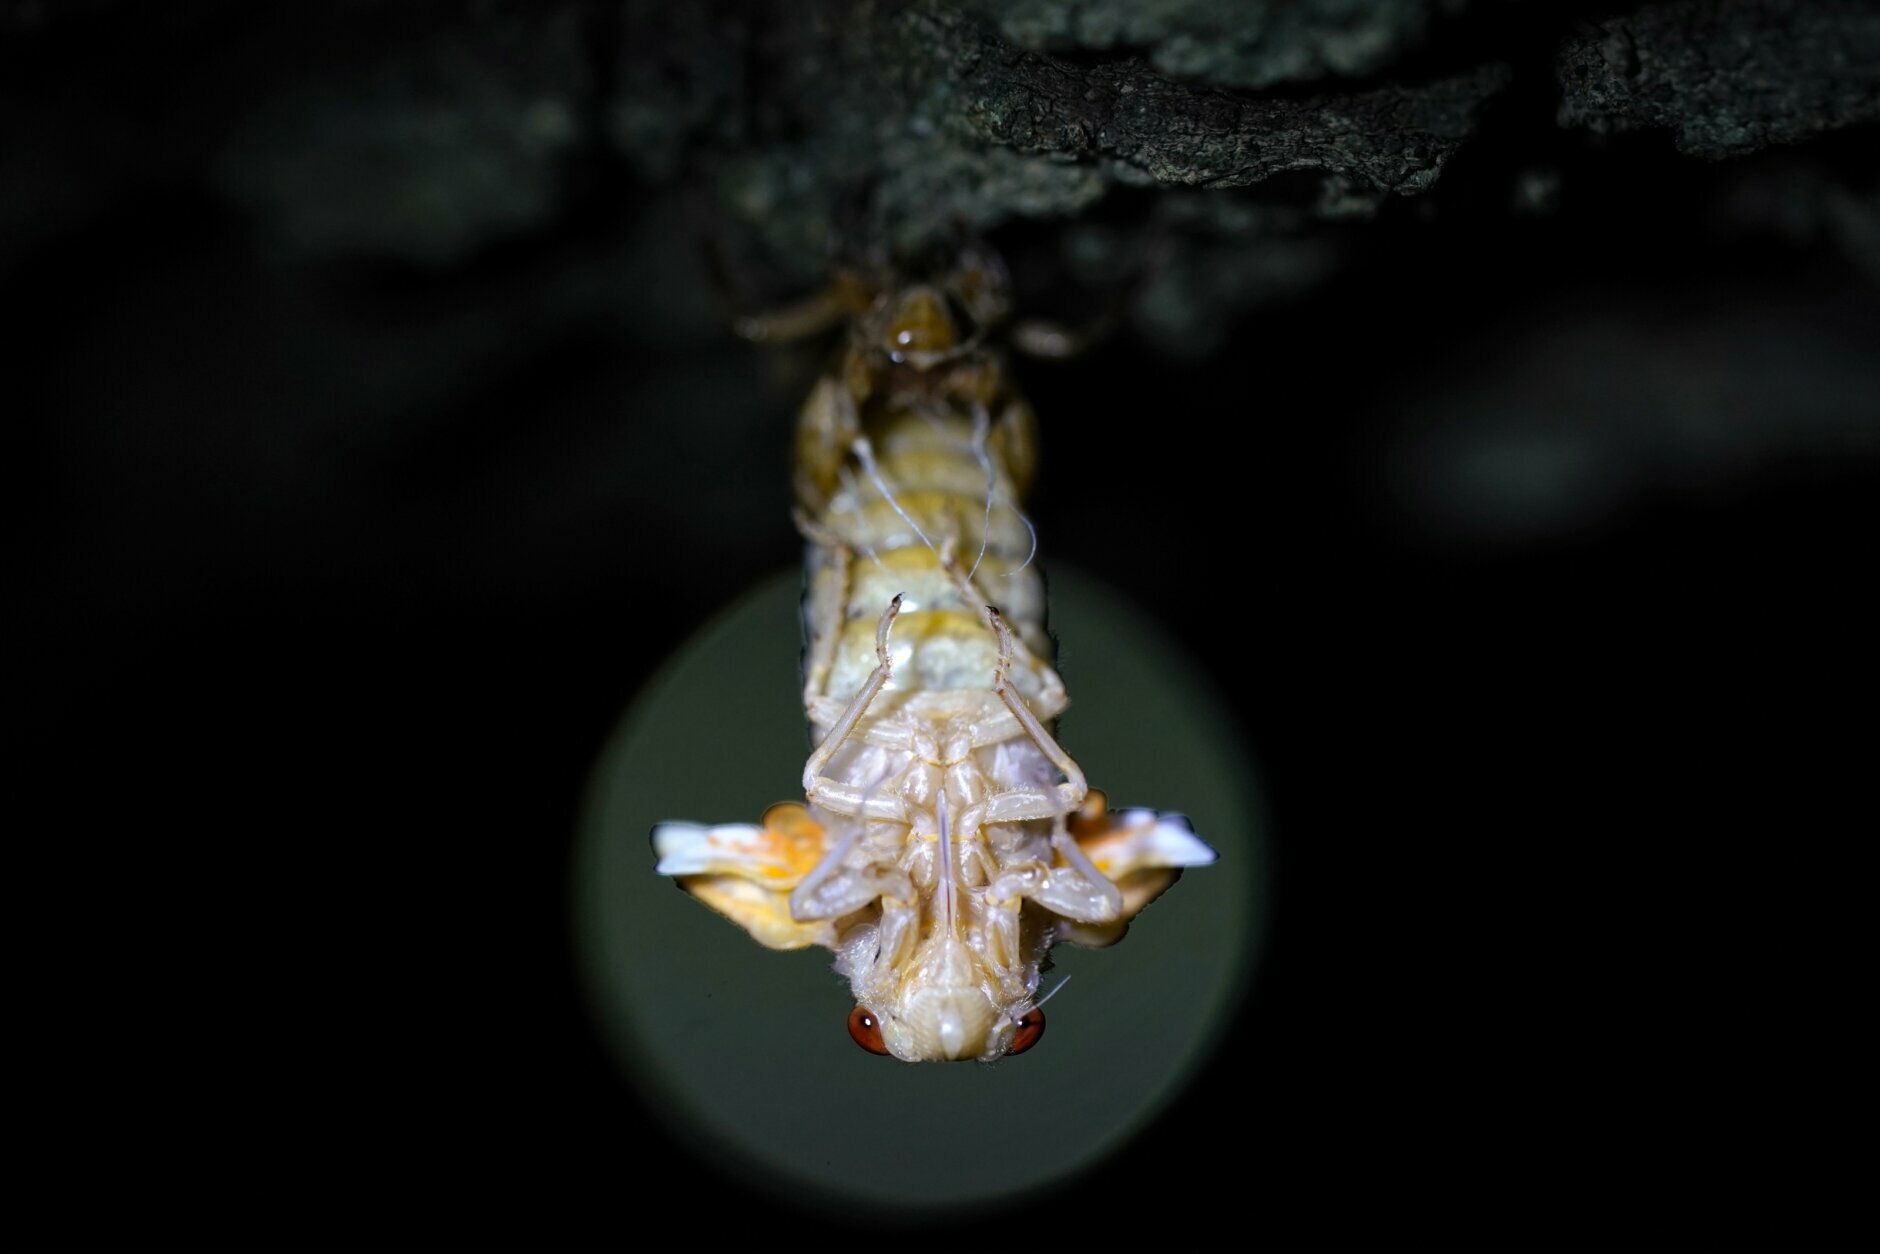 A cicada hangs just after shedding its nymph shell as a street light shines behind in the distance in Chevy Chase, Md., Monday, May 10, 2021. (AP Photo/Carolyn Kaster)